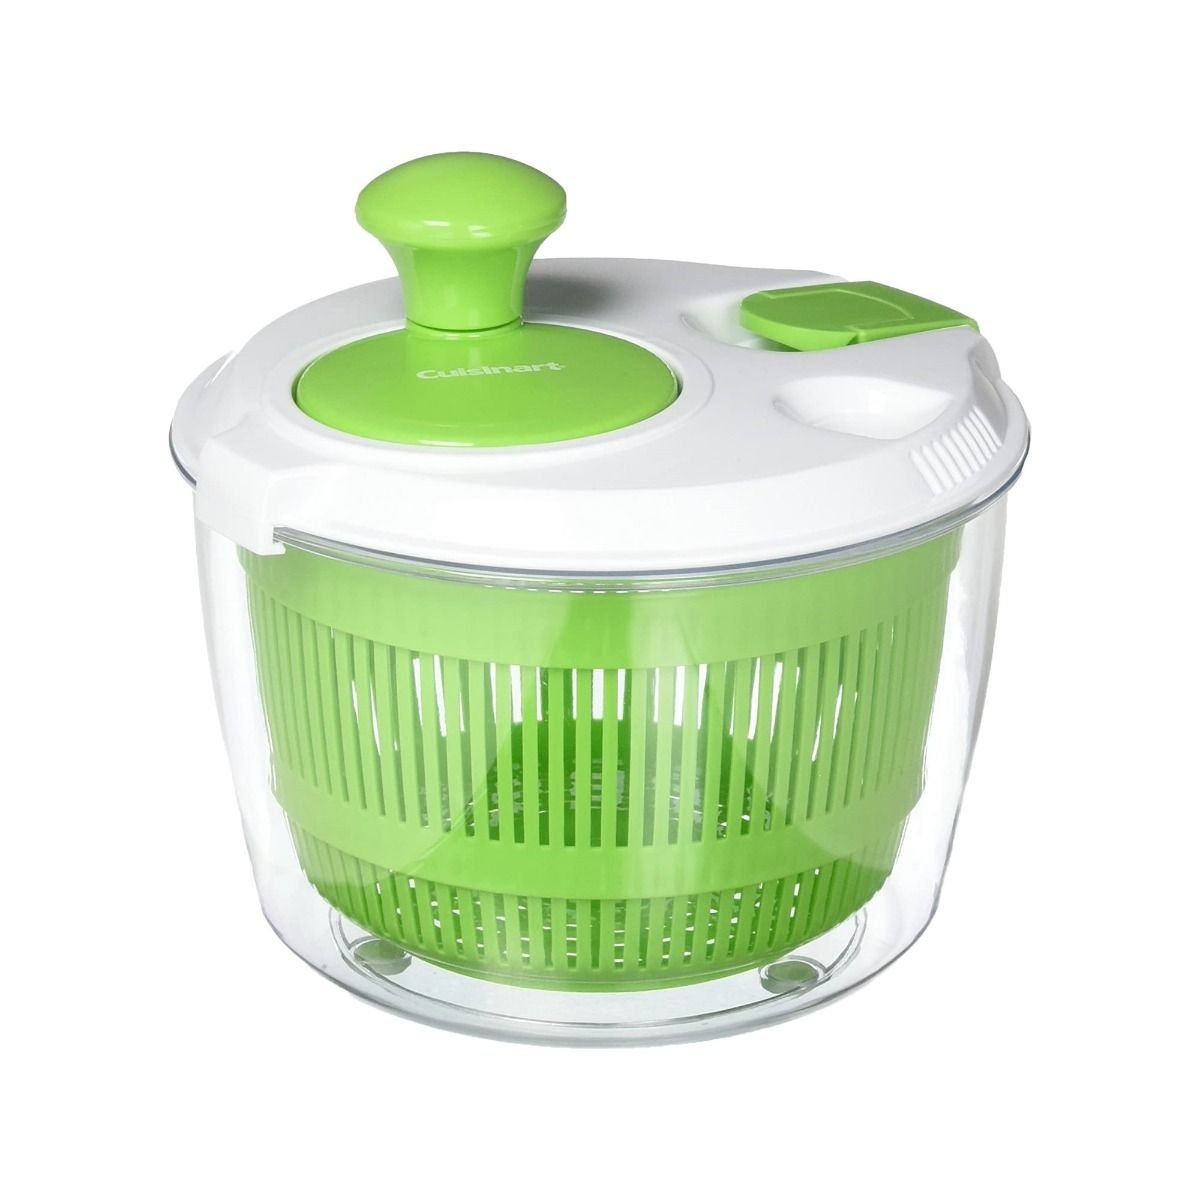 This salad spinner cleans your greens better than handwashing